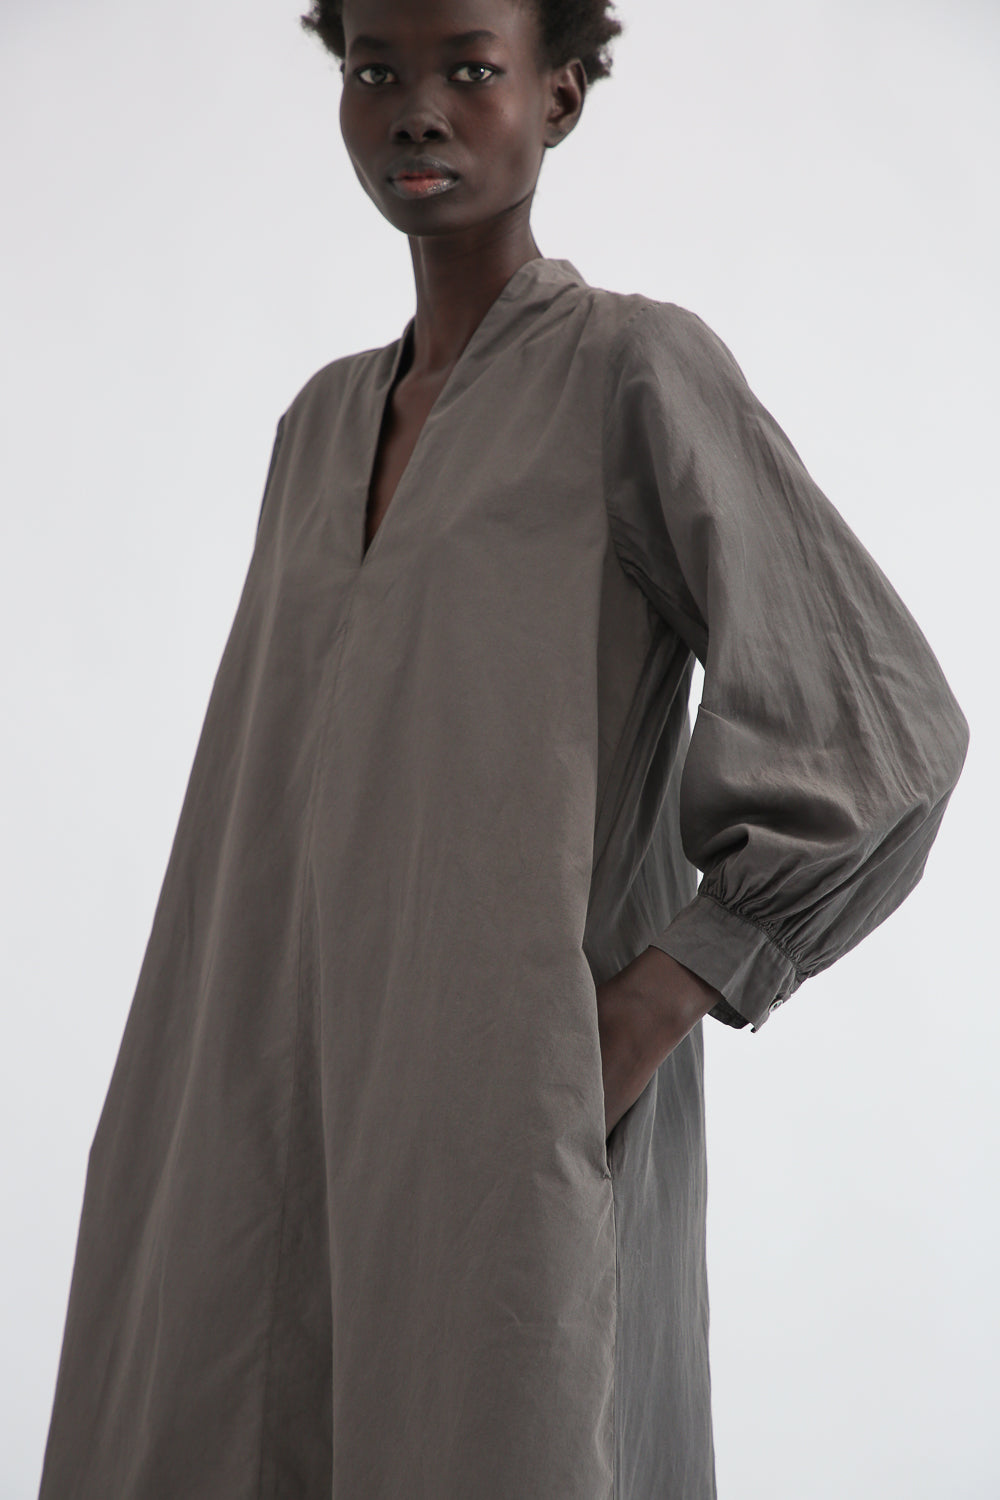 Beautiful V-Neck Dress - Silk & Cotton in Ancient Soot